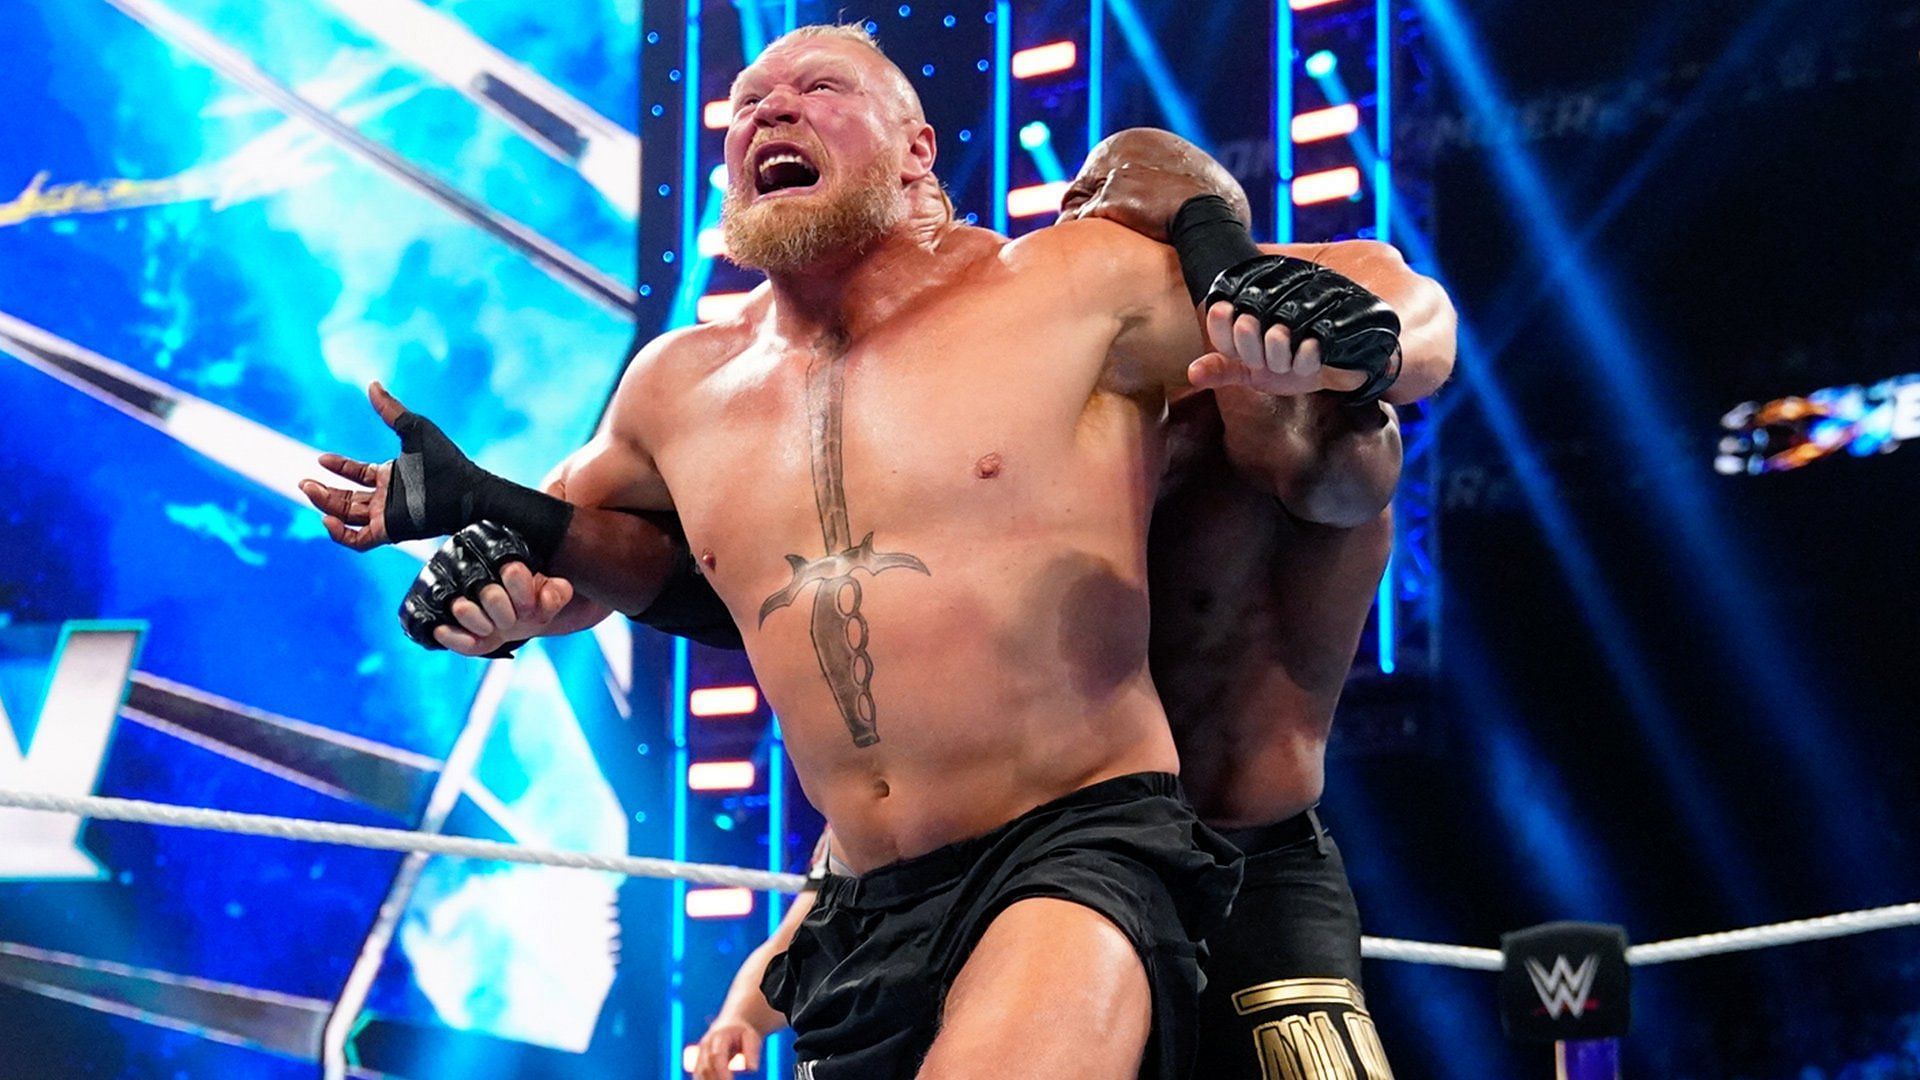 Brock Lesnar could tap out to the Hurt Lock at WWE WrestleMania 39.